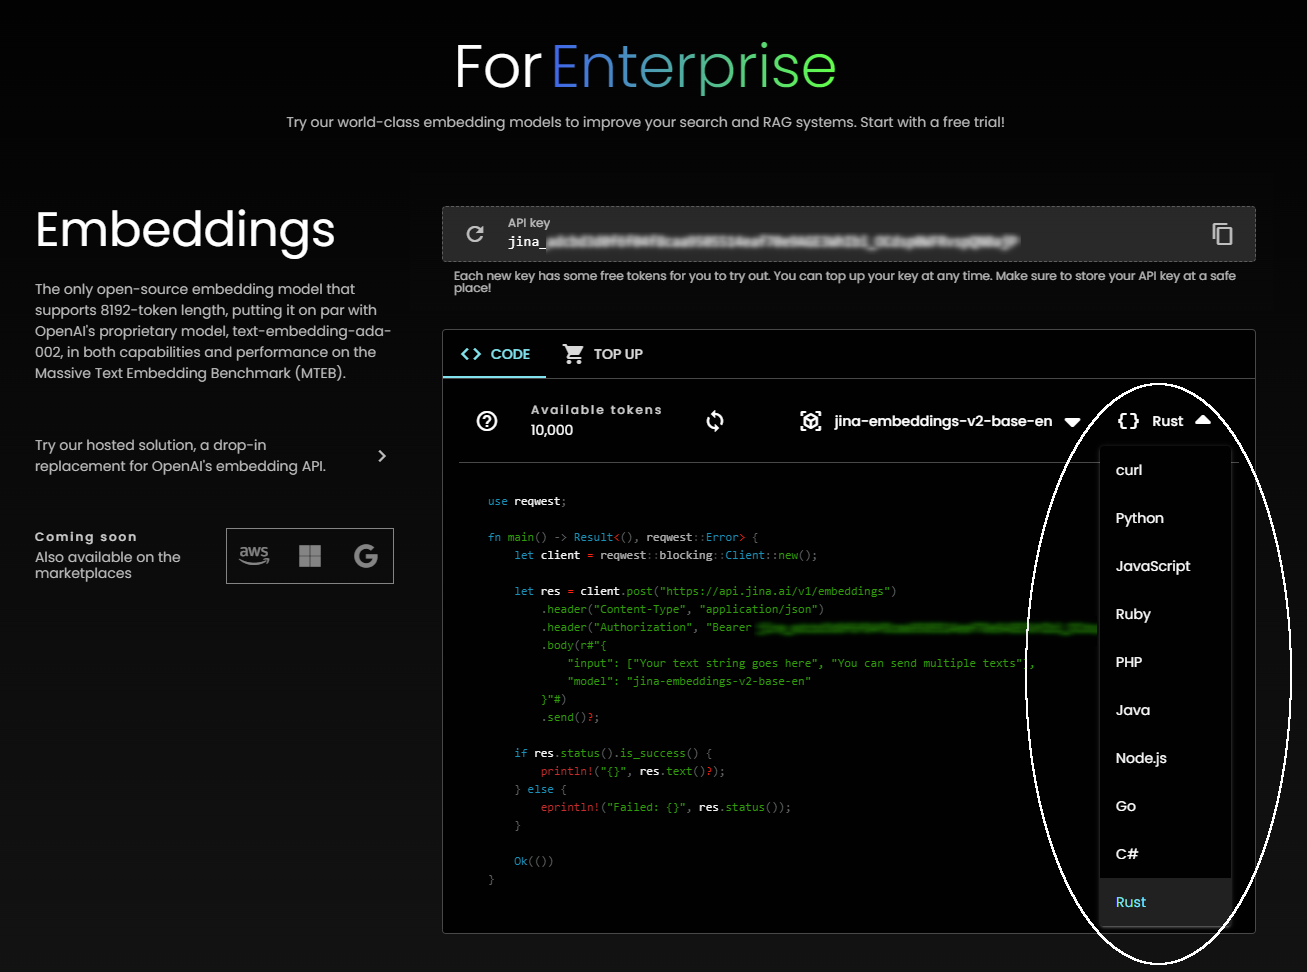 Dark mode web interface of "ForEnterprise" showing embedding models for technologies like Rust and Python with a free trial offer